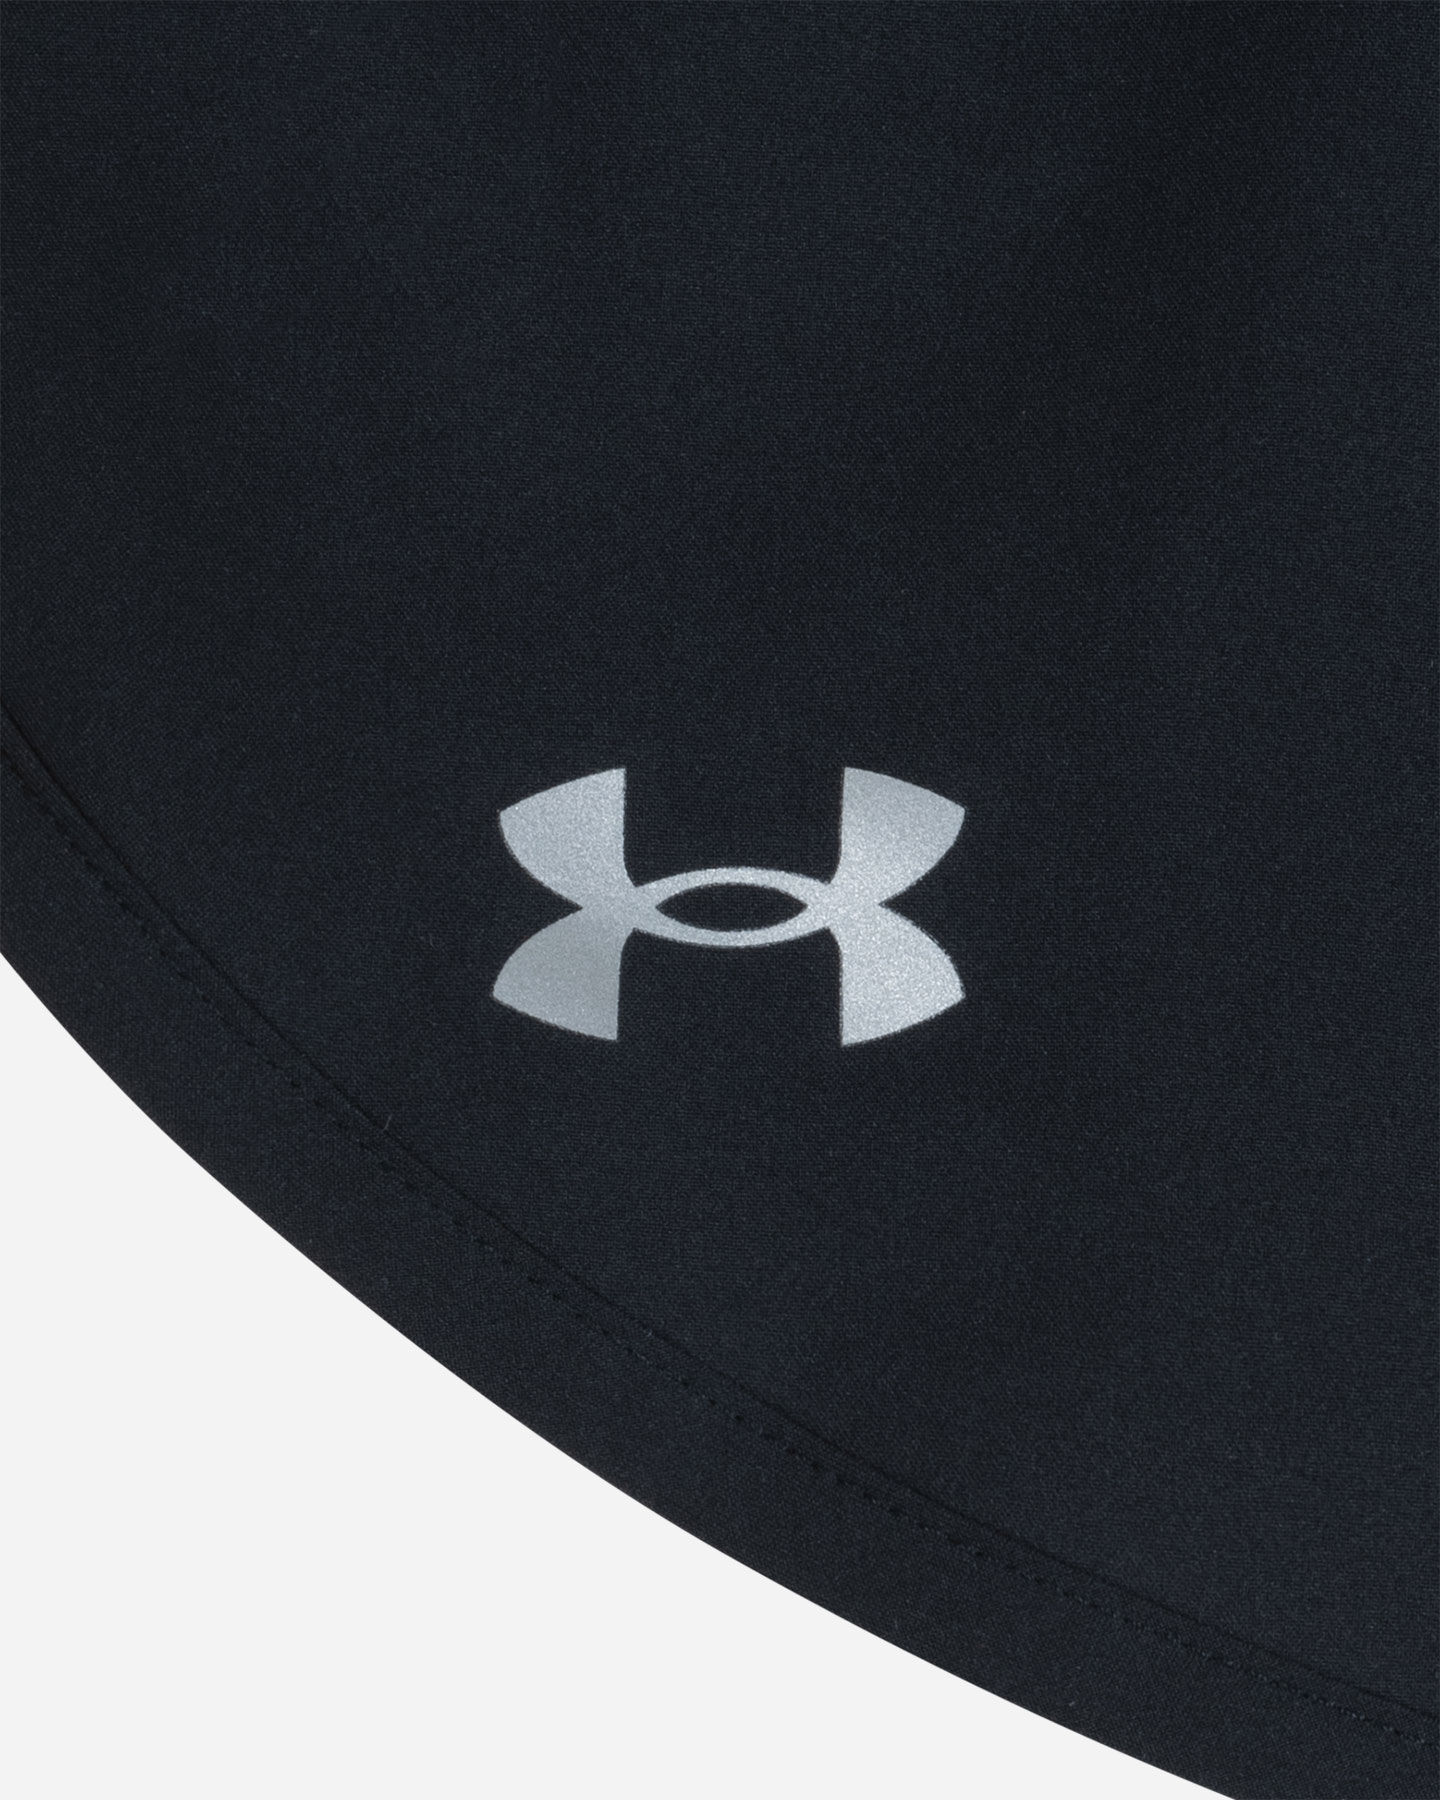  Short running UNDER ARMOUR FLY BY ELITE 3 W S5390177|0001|LG scatto 2